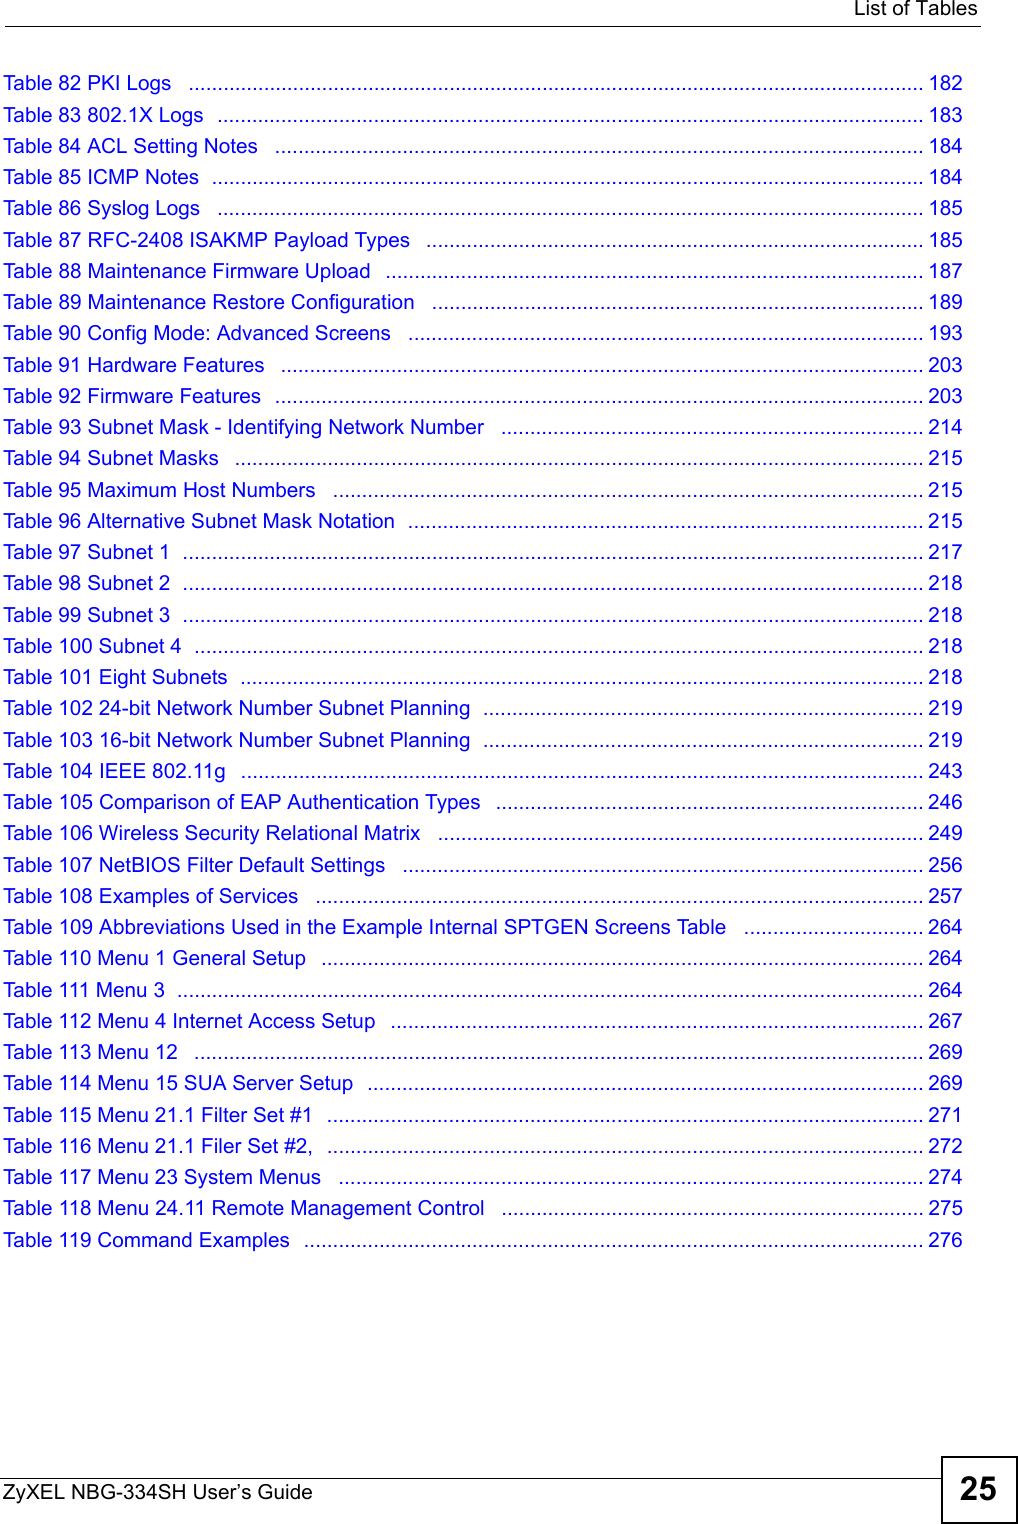   List of TablesZyXEL NBG-334SH User’s Guide 25Table 82 PKI Logs   ............................................................................................................................... 182Table 83 802.1X Logs  .......................................................................................................................... 183Table 84 ACL Setting Notes   ................................................................................................................ 184Table 85 ICMP Notes  ........................................................................................................................... 184Table 86 Syslog Logs   .......................................................................................................................... 185Table 87 RFC-2408 ISAKMP Payload Types   ...................................................................................... 185Table 88 Maintenance Firmware Upload   ............................................................................................. 187Table 89 Maintenance Restore Configuration   ..................................................................................... 189Table 90 Config Mode: Advanced Screens   ......................................................................................... 193Table 91 Hardware Features   ............................................................................................................... 203Table 92 Firmware Features  ................................................................................................................ 203Table 93 Subnet Mask - Identifying Network Number   ......................................................................... 214Table 94 Subnet Masks   ....................................................................................................................... 215Table 95 Maximum Host Numbers   ...................................................................................................... 215Table 96 Alternative Subnet Mask Notation  ......................................................................................... 215Table 97 Subnet 1  ................................................................................................................................ 217Table 98 Subnet 2  ................................................................................................................................ 218Table 99 Subnet 3  ................................................................................................................................ 218Table 100 Subnet 4  .............................................................................................................................. 218Table 101 Eight Subnets  ...................................................................................................................... 218Table 102 24-bit Network Number Subnet Planning  ............................................................................ 219Table 103 16-bit Network Number Subnet Planning  ............................................................................ 219Table 104 IEEE 802.11g   ...................................................................................................................... 243Table 105 Comparison of EAP Authentication Types   .......................................................................... 246Table 106 Wireless Security Relational Matrix   .................................................................................... 249Table 107 NetBIOS Filter Default Settings   .......................................................................................... 256Table 108 Examples of Services   ......................................................................................................... 257Table 109 Abbreviations Used in the Example Internal SPTGEN Screens Table   ............................... 264Table 110 Menu 1 General Setup   ........................................................................................................ 264Table 111 Menu 3  ................................................................................................................................. 264Table 112 Menu 4 Internet Access Setup   ............................................................................................ 267Table 113 Menu 12   .............................................................................................................................. 269Table 114 Menu 15 SUA Server Setup  ................................................................................................ 269Table 115 Menu 21.1 Filter Set #1  ....................................................................................................... 271Table 116 Menu 21.1 Filer Set #2,  ....................................................................................................... 272Table 117 Menu 23 System Menus   ..................................................................................................... 274Table 118 Menu 24.11 Remote Management Control   ......................................................................... 275Table 119 Command Examples  ........................................................................................................... 276